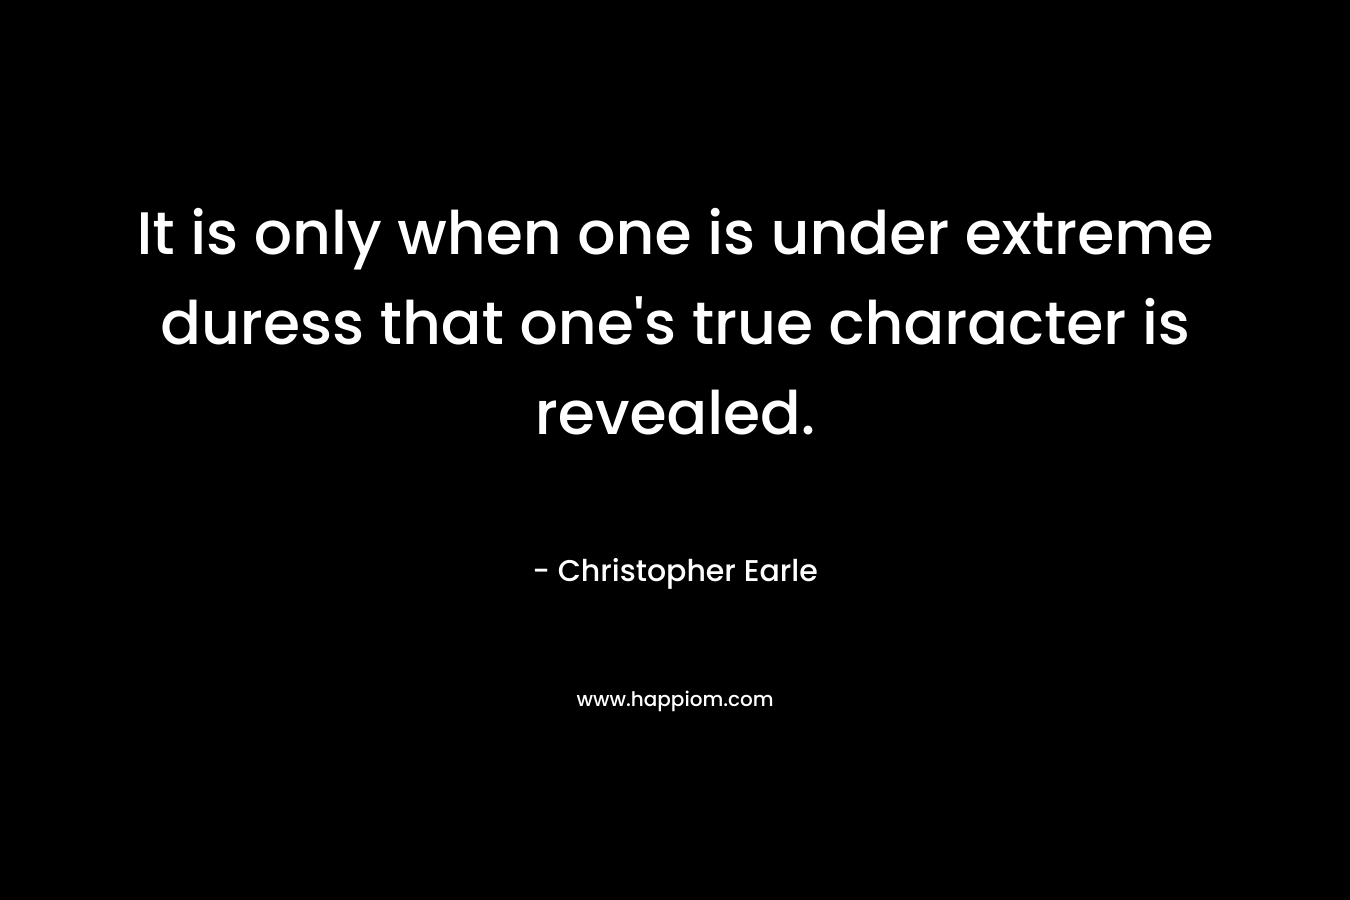 It is only when one is under extreme duress that one’s true character is revealed. – Christopher Earle